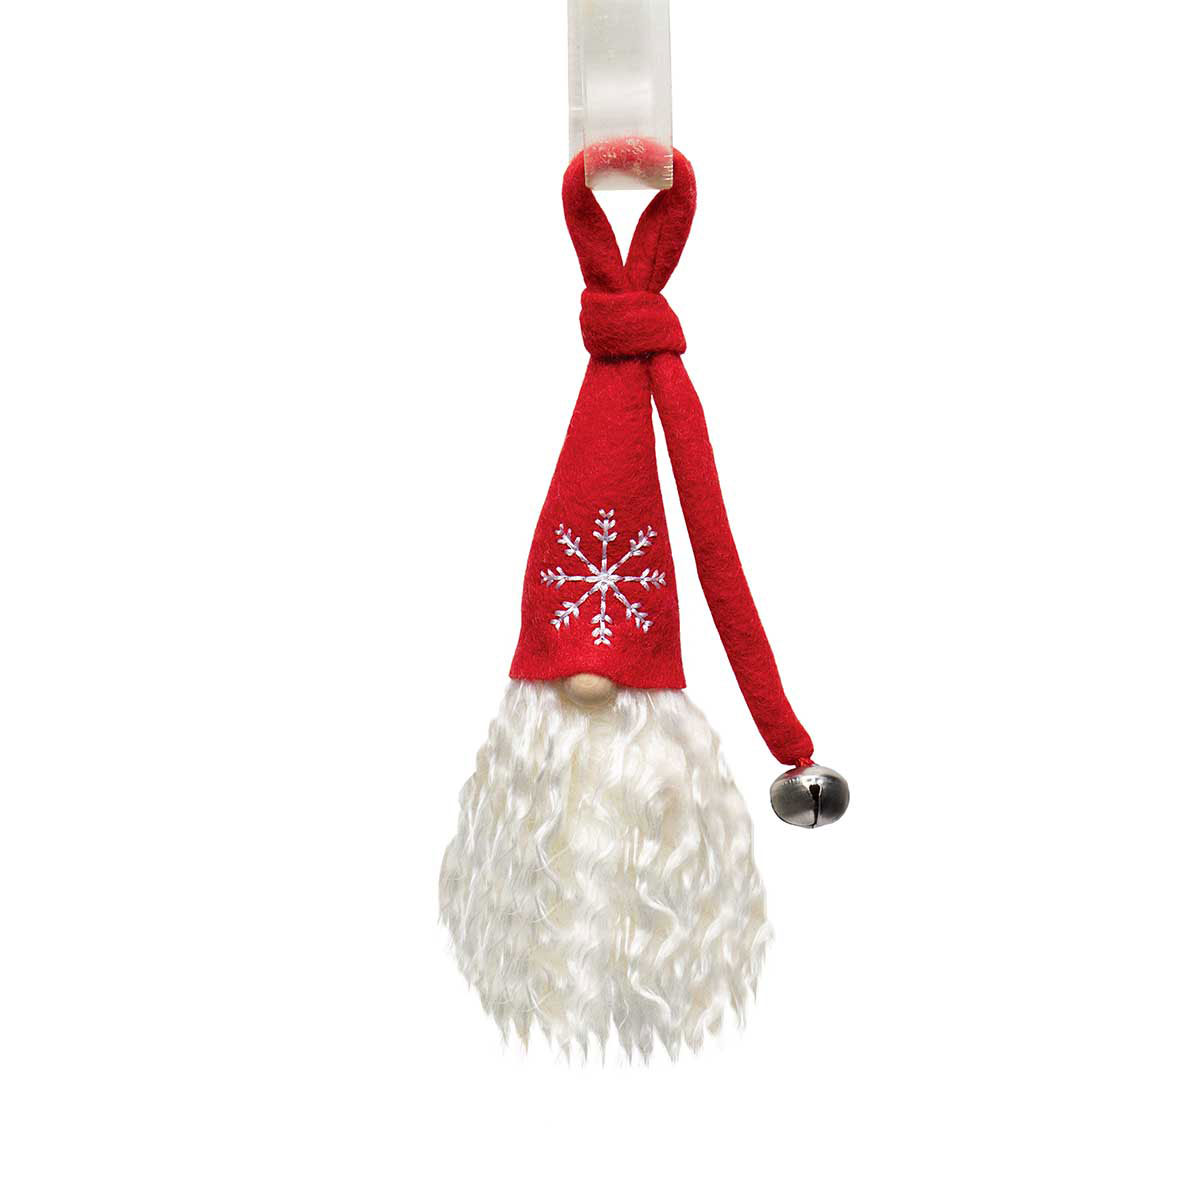 PIERRE' NOEL GNOME RED WITH JINGLE BELL, SNOWFLAKE